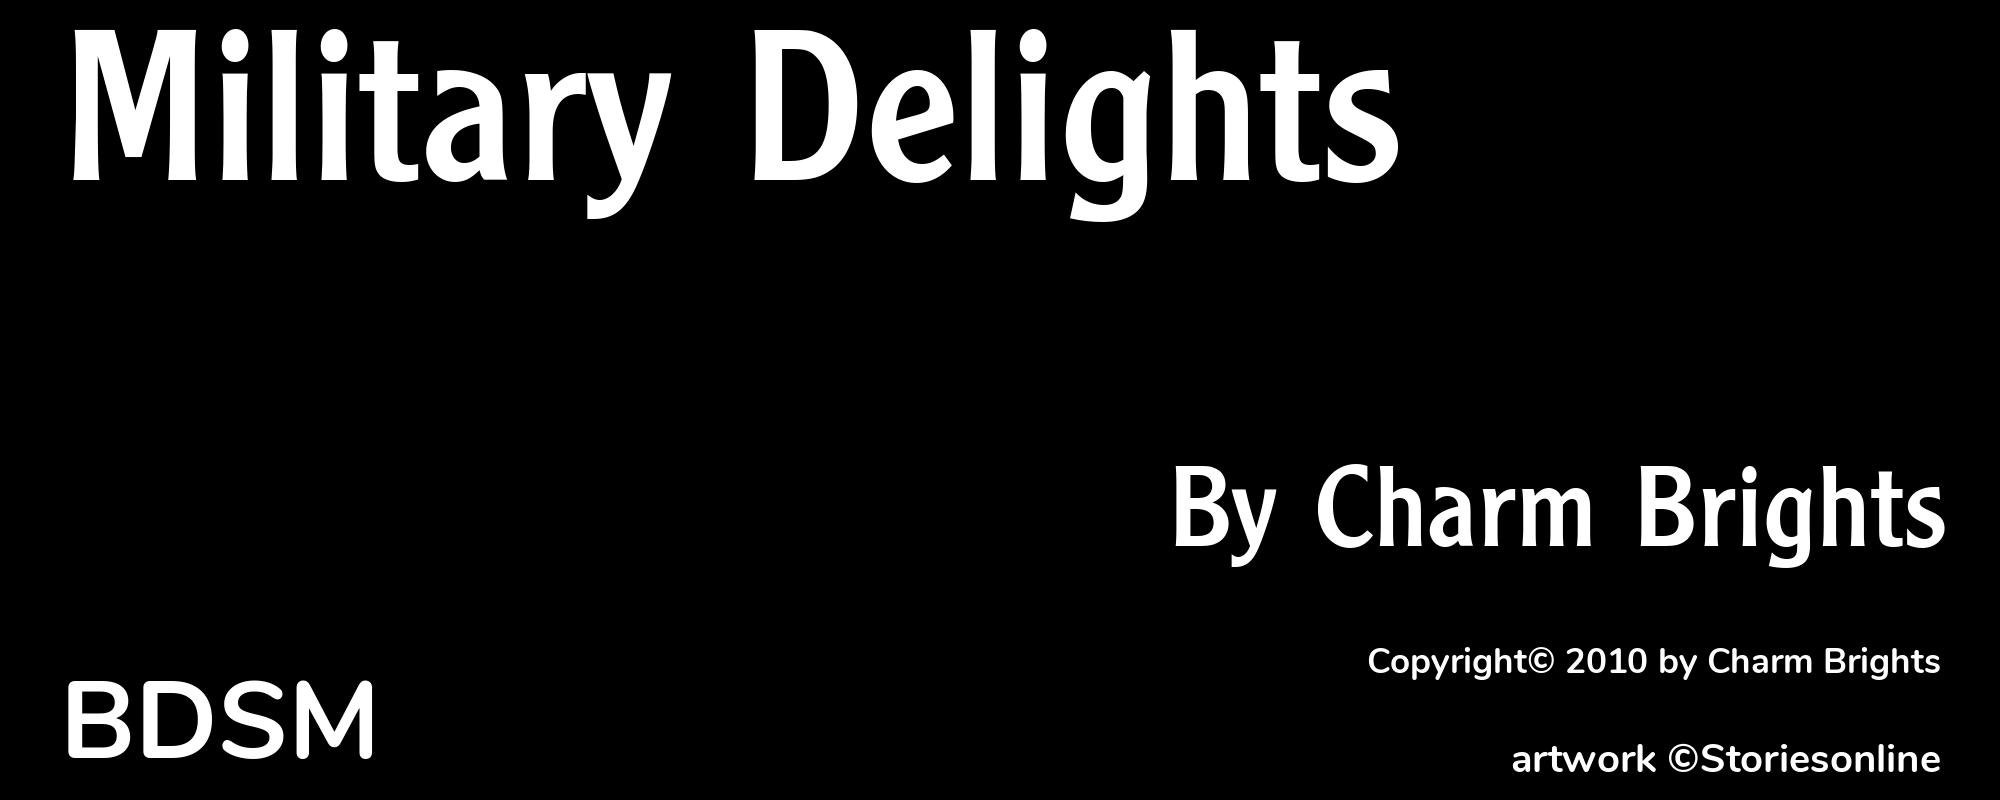 Military Delights - Cover